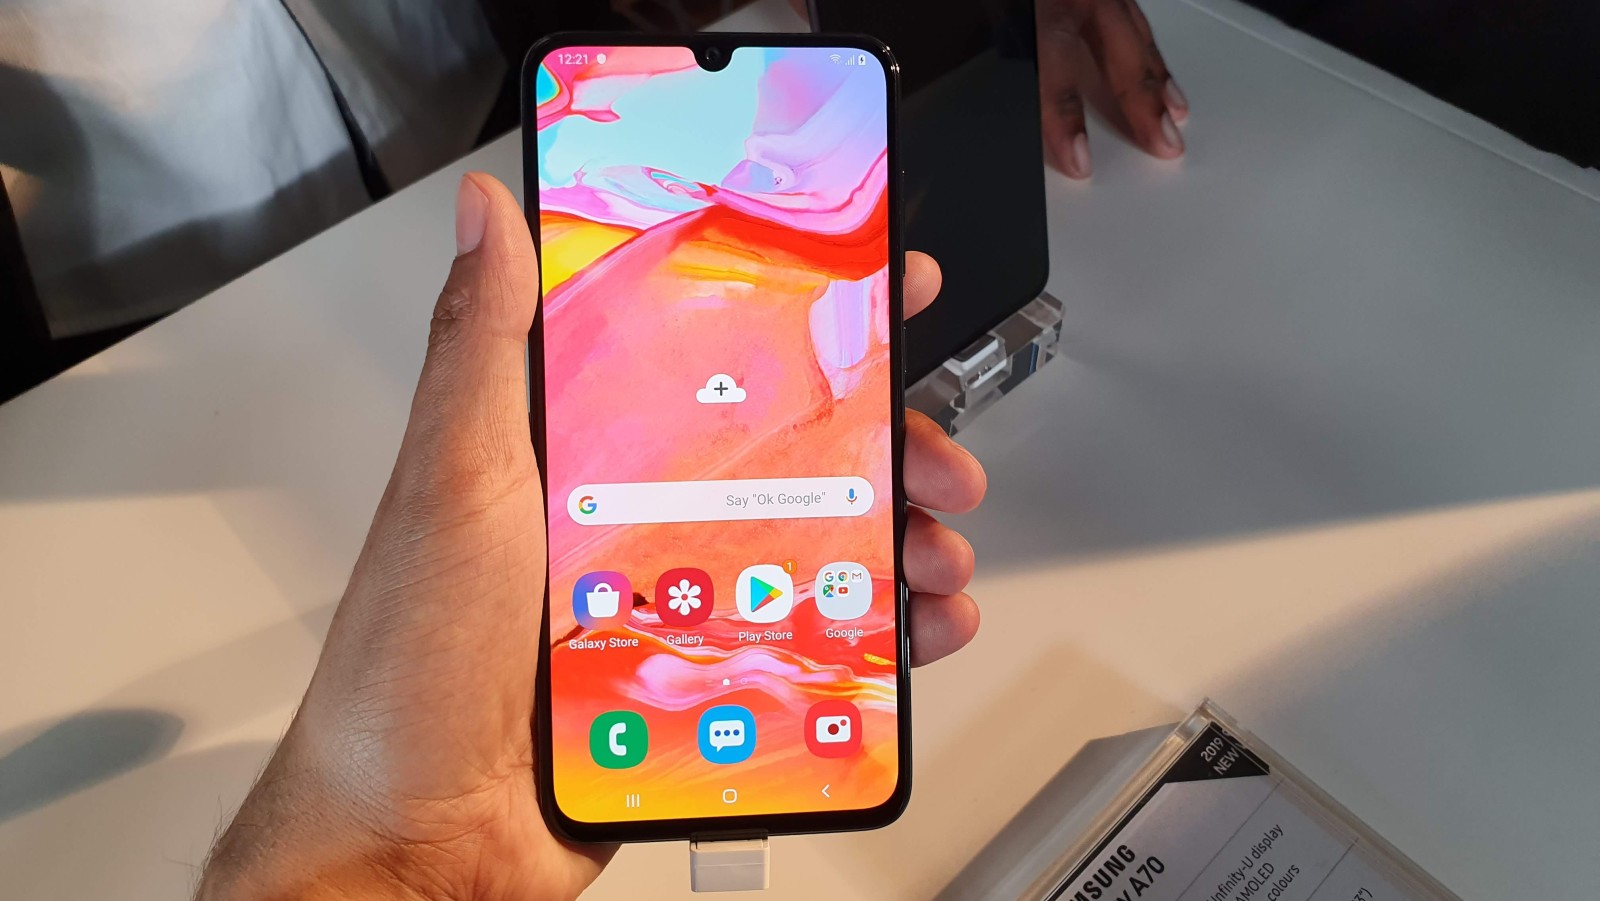 10 tips and tricks for setting up your Samsung Galaxy A70